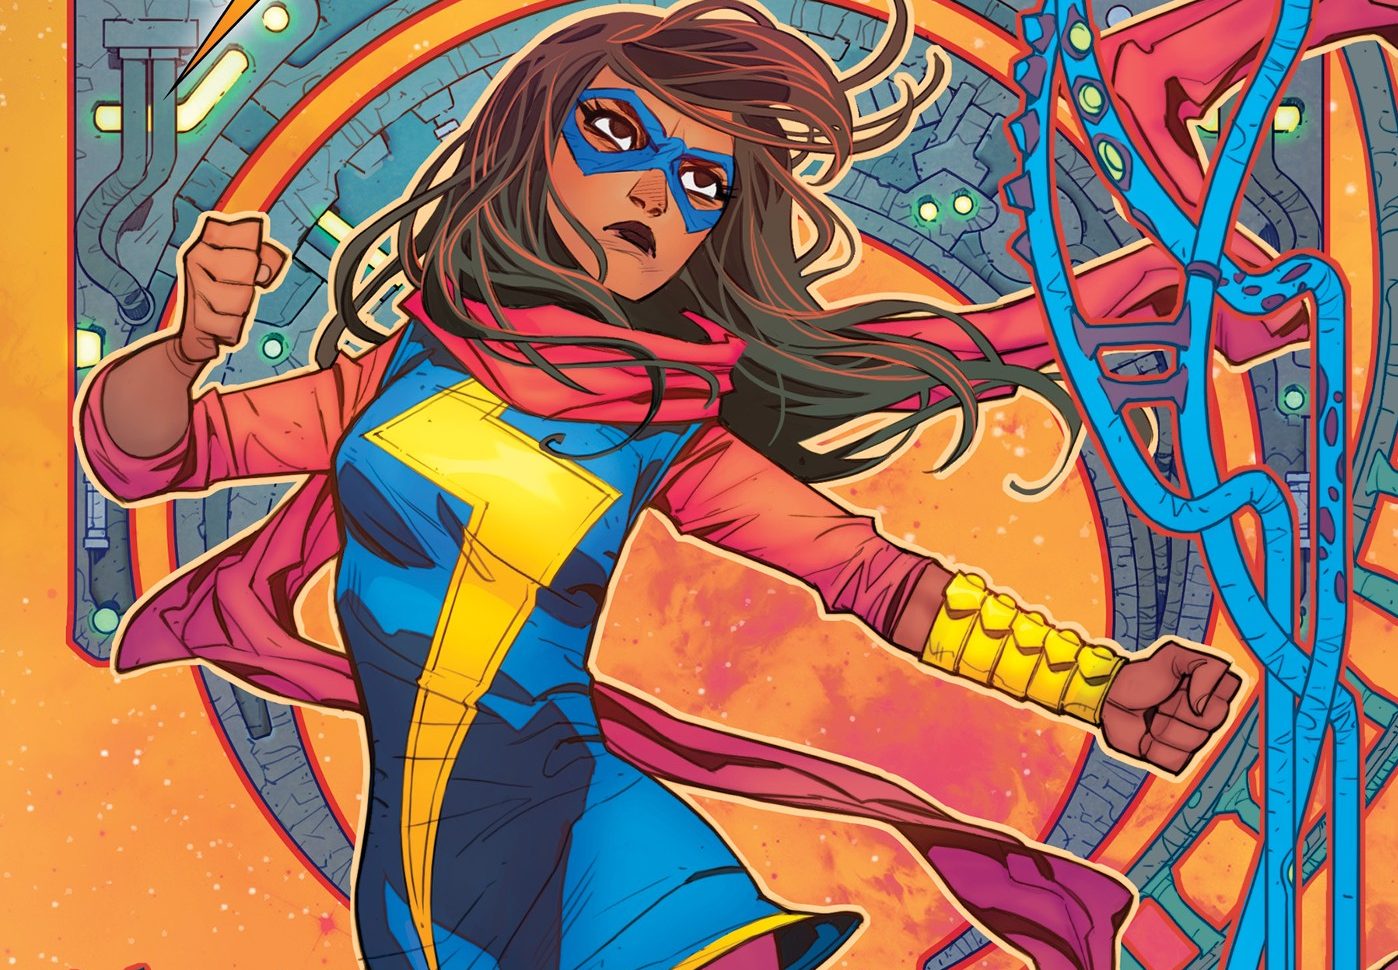 'Ms. Marvel by Saladin Ahmed' feels like a classic comic for a modern reader